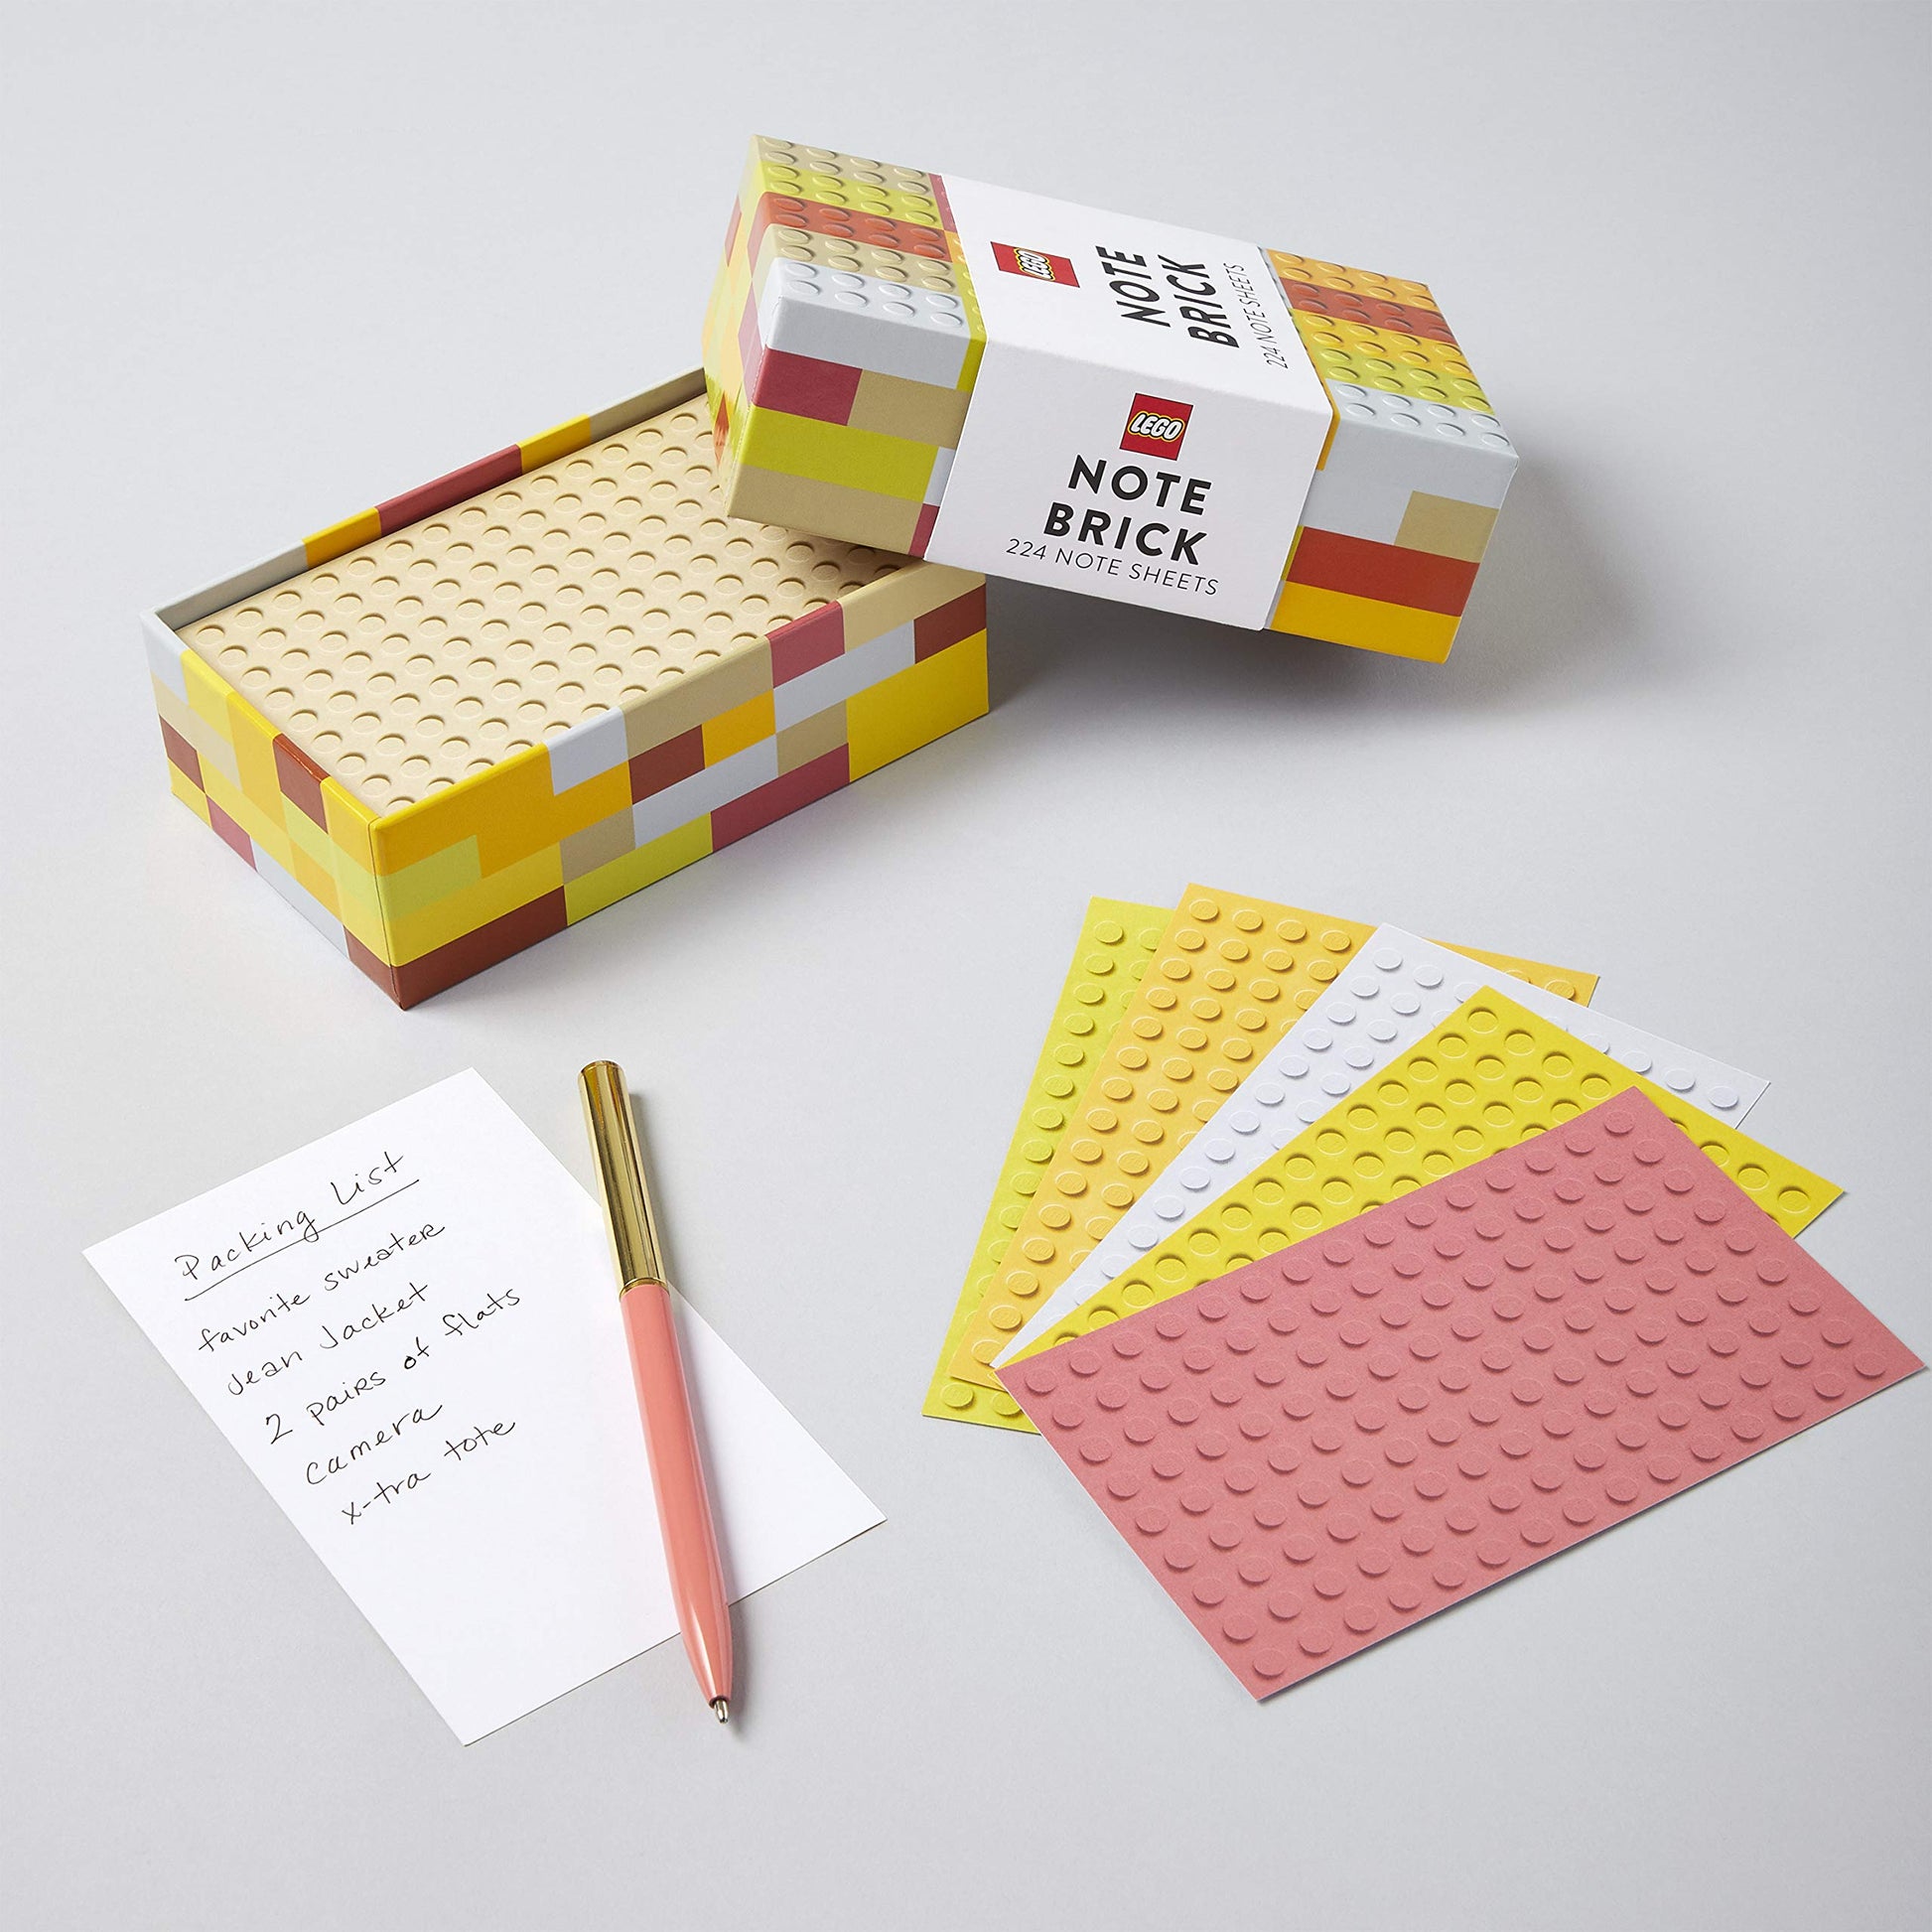 lego designed box with lid off-set to show note paper inside and sheets of note paper with lego design fanned out with a pen.